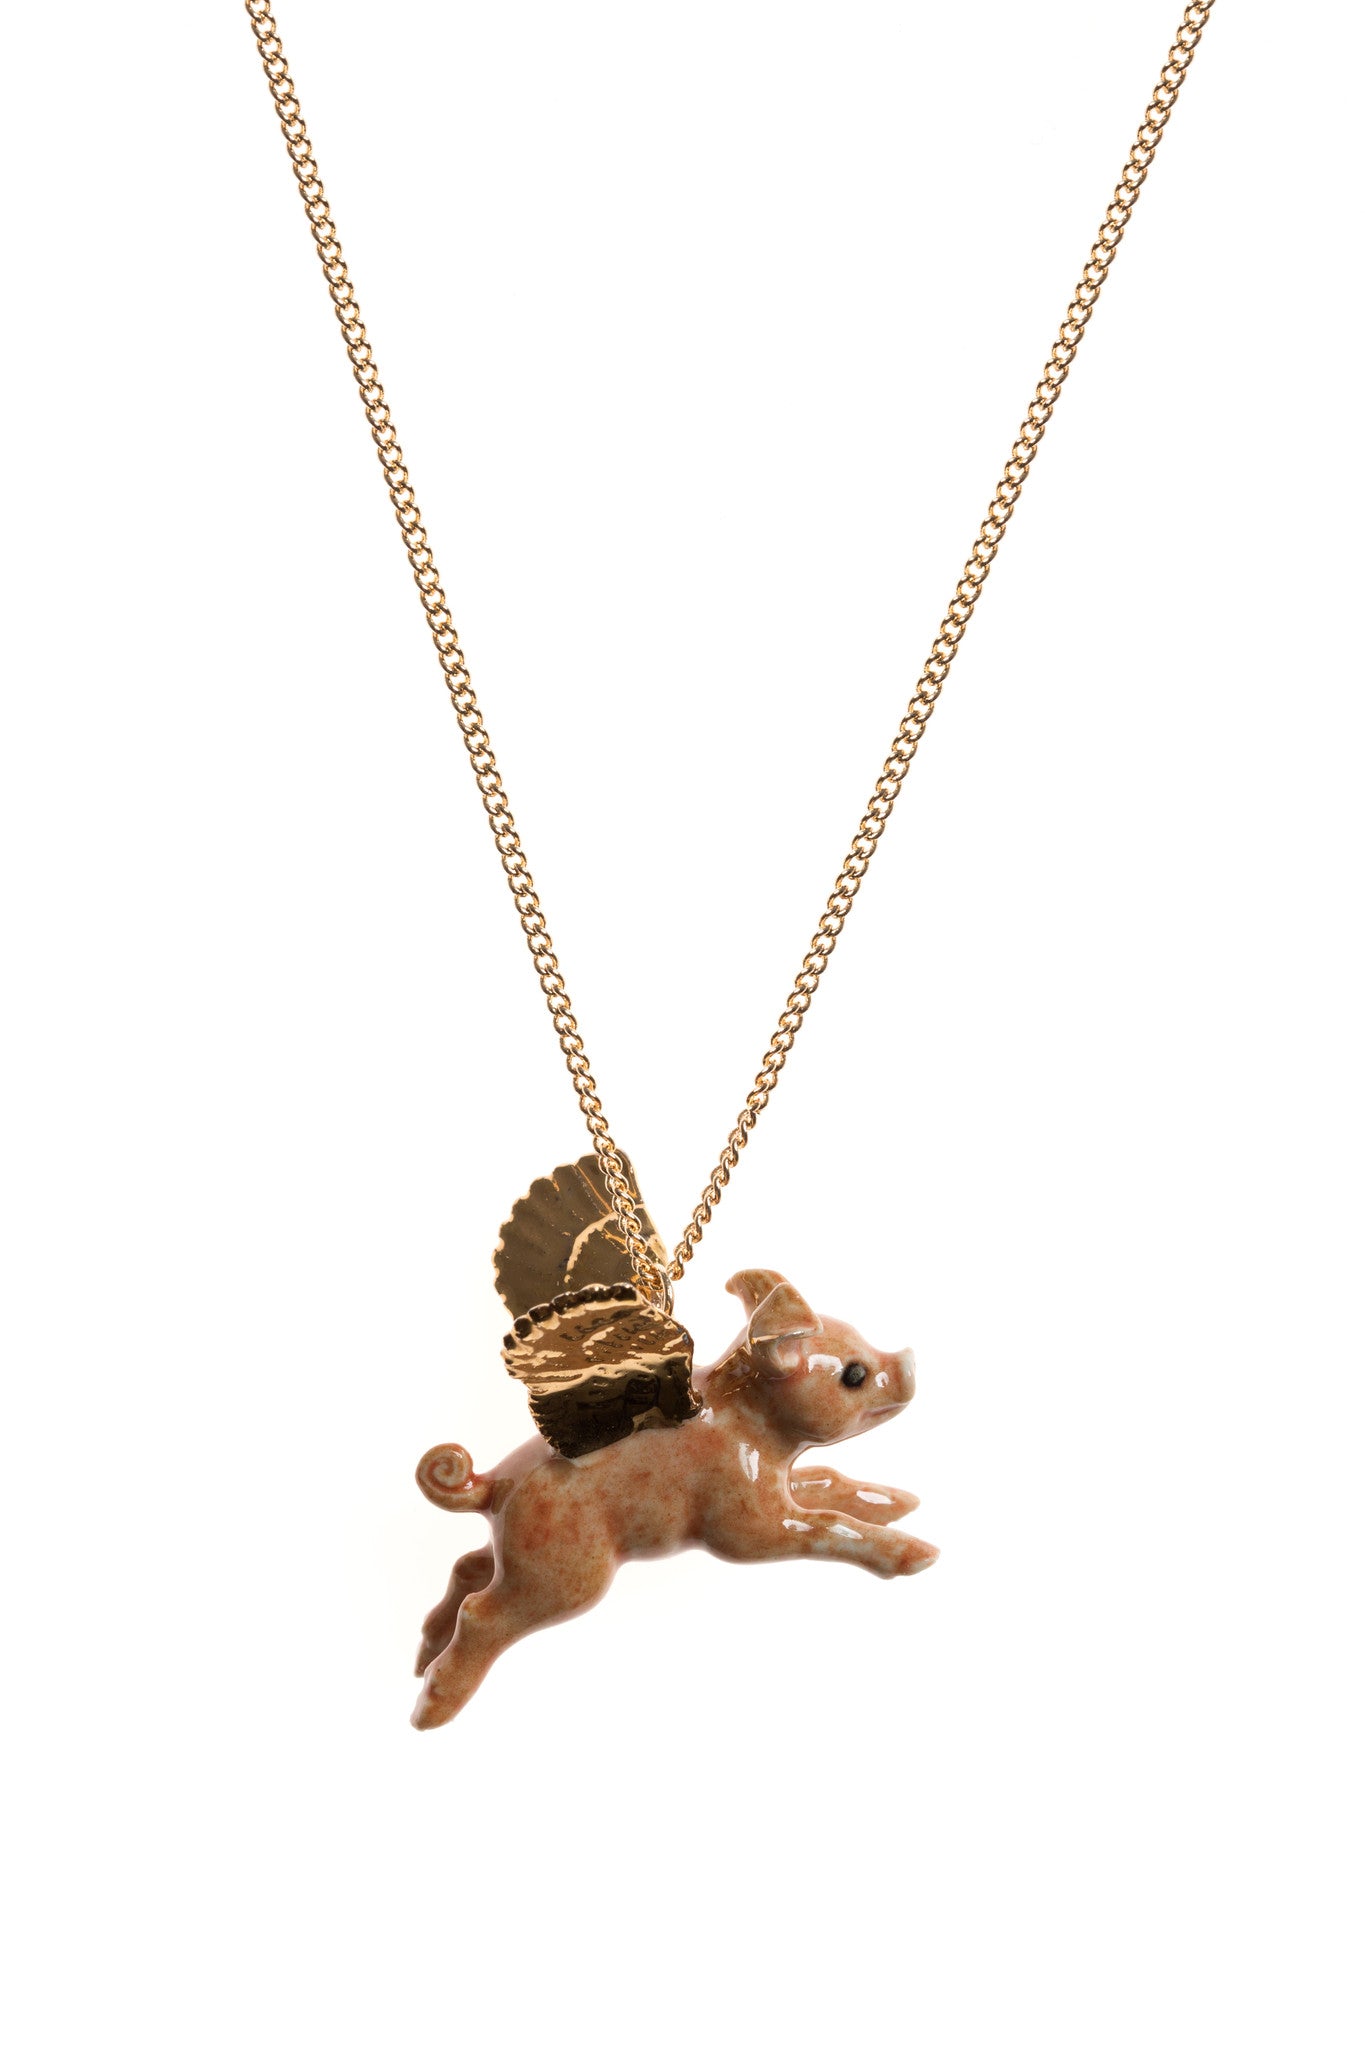 Flying Pig Necklace With Gold Wings